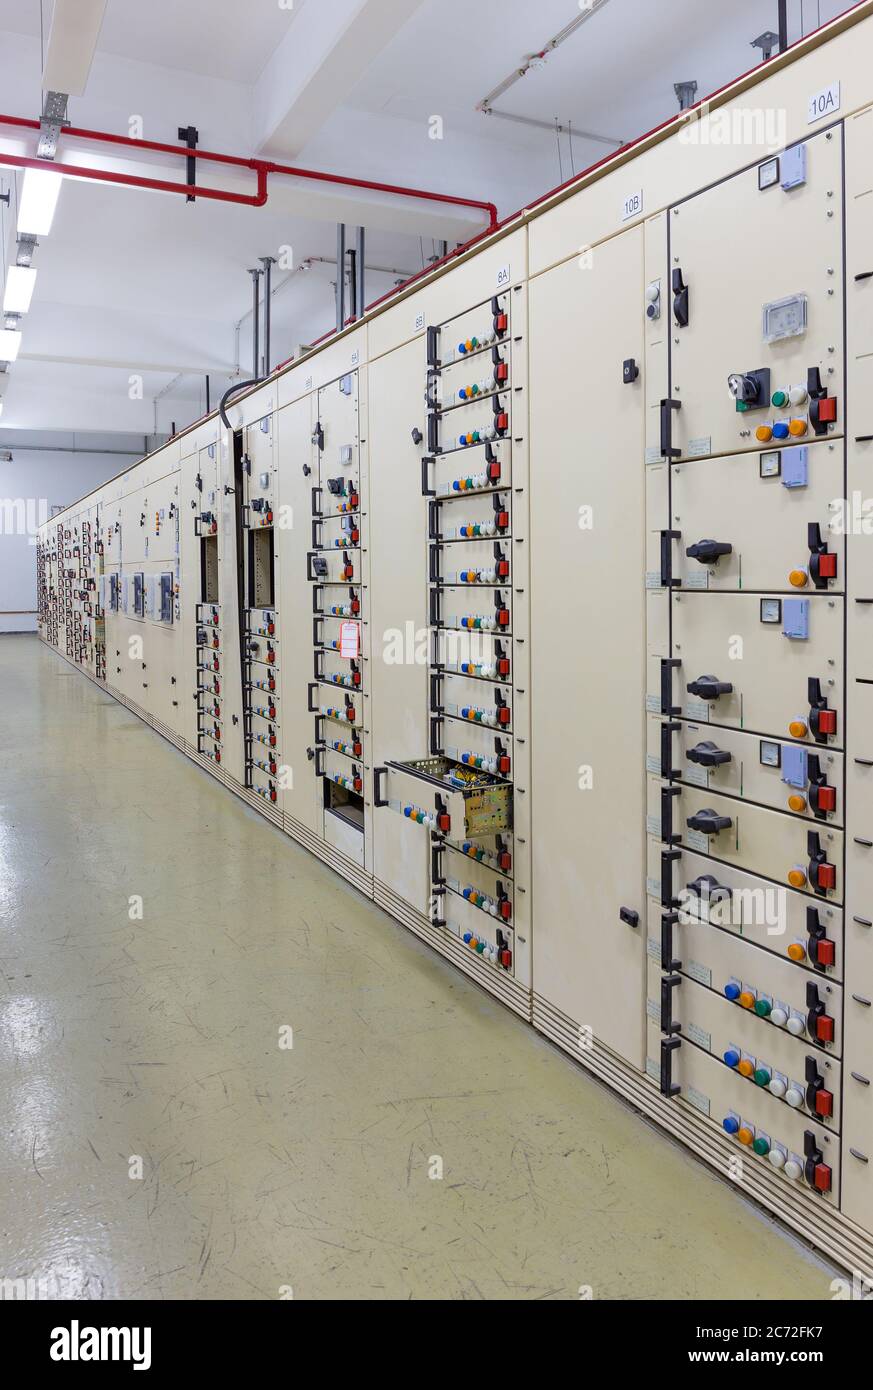 Electric voltage control room of a power plant Stock Photo